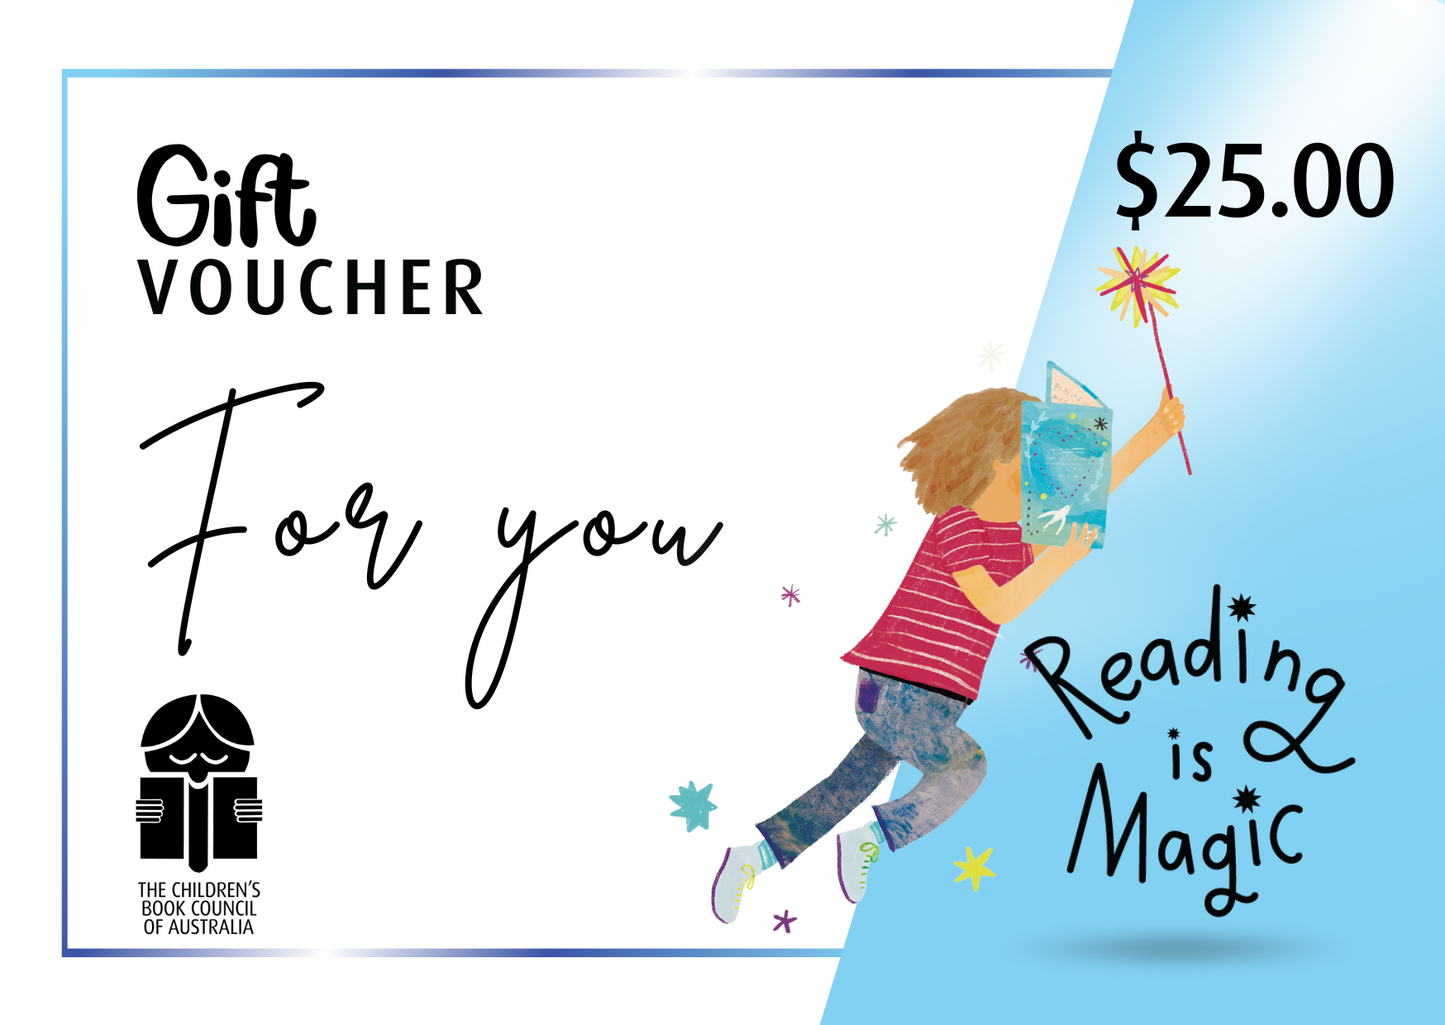 An image of a 25 dollar gift voucher, with the CBCA logo in the lower left corner and an illustration of a child in profile reading from a book being held in one hand and a wand upwards in the other arm.